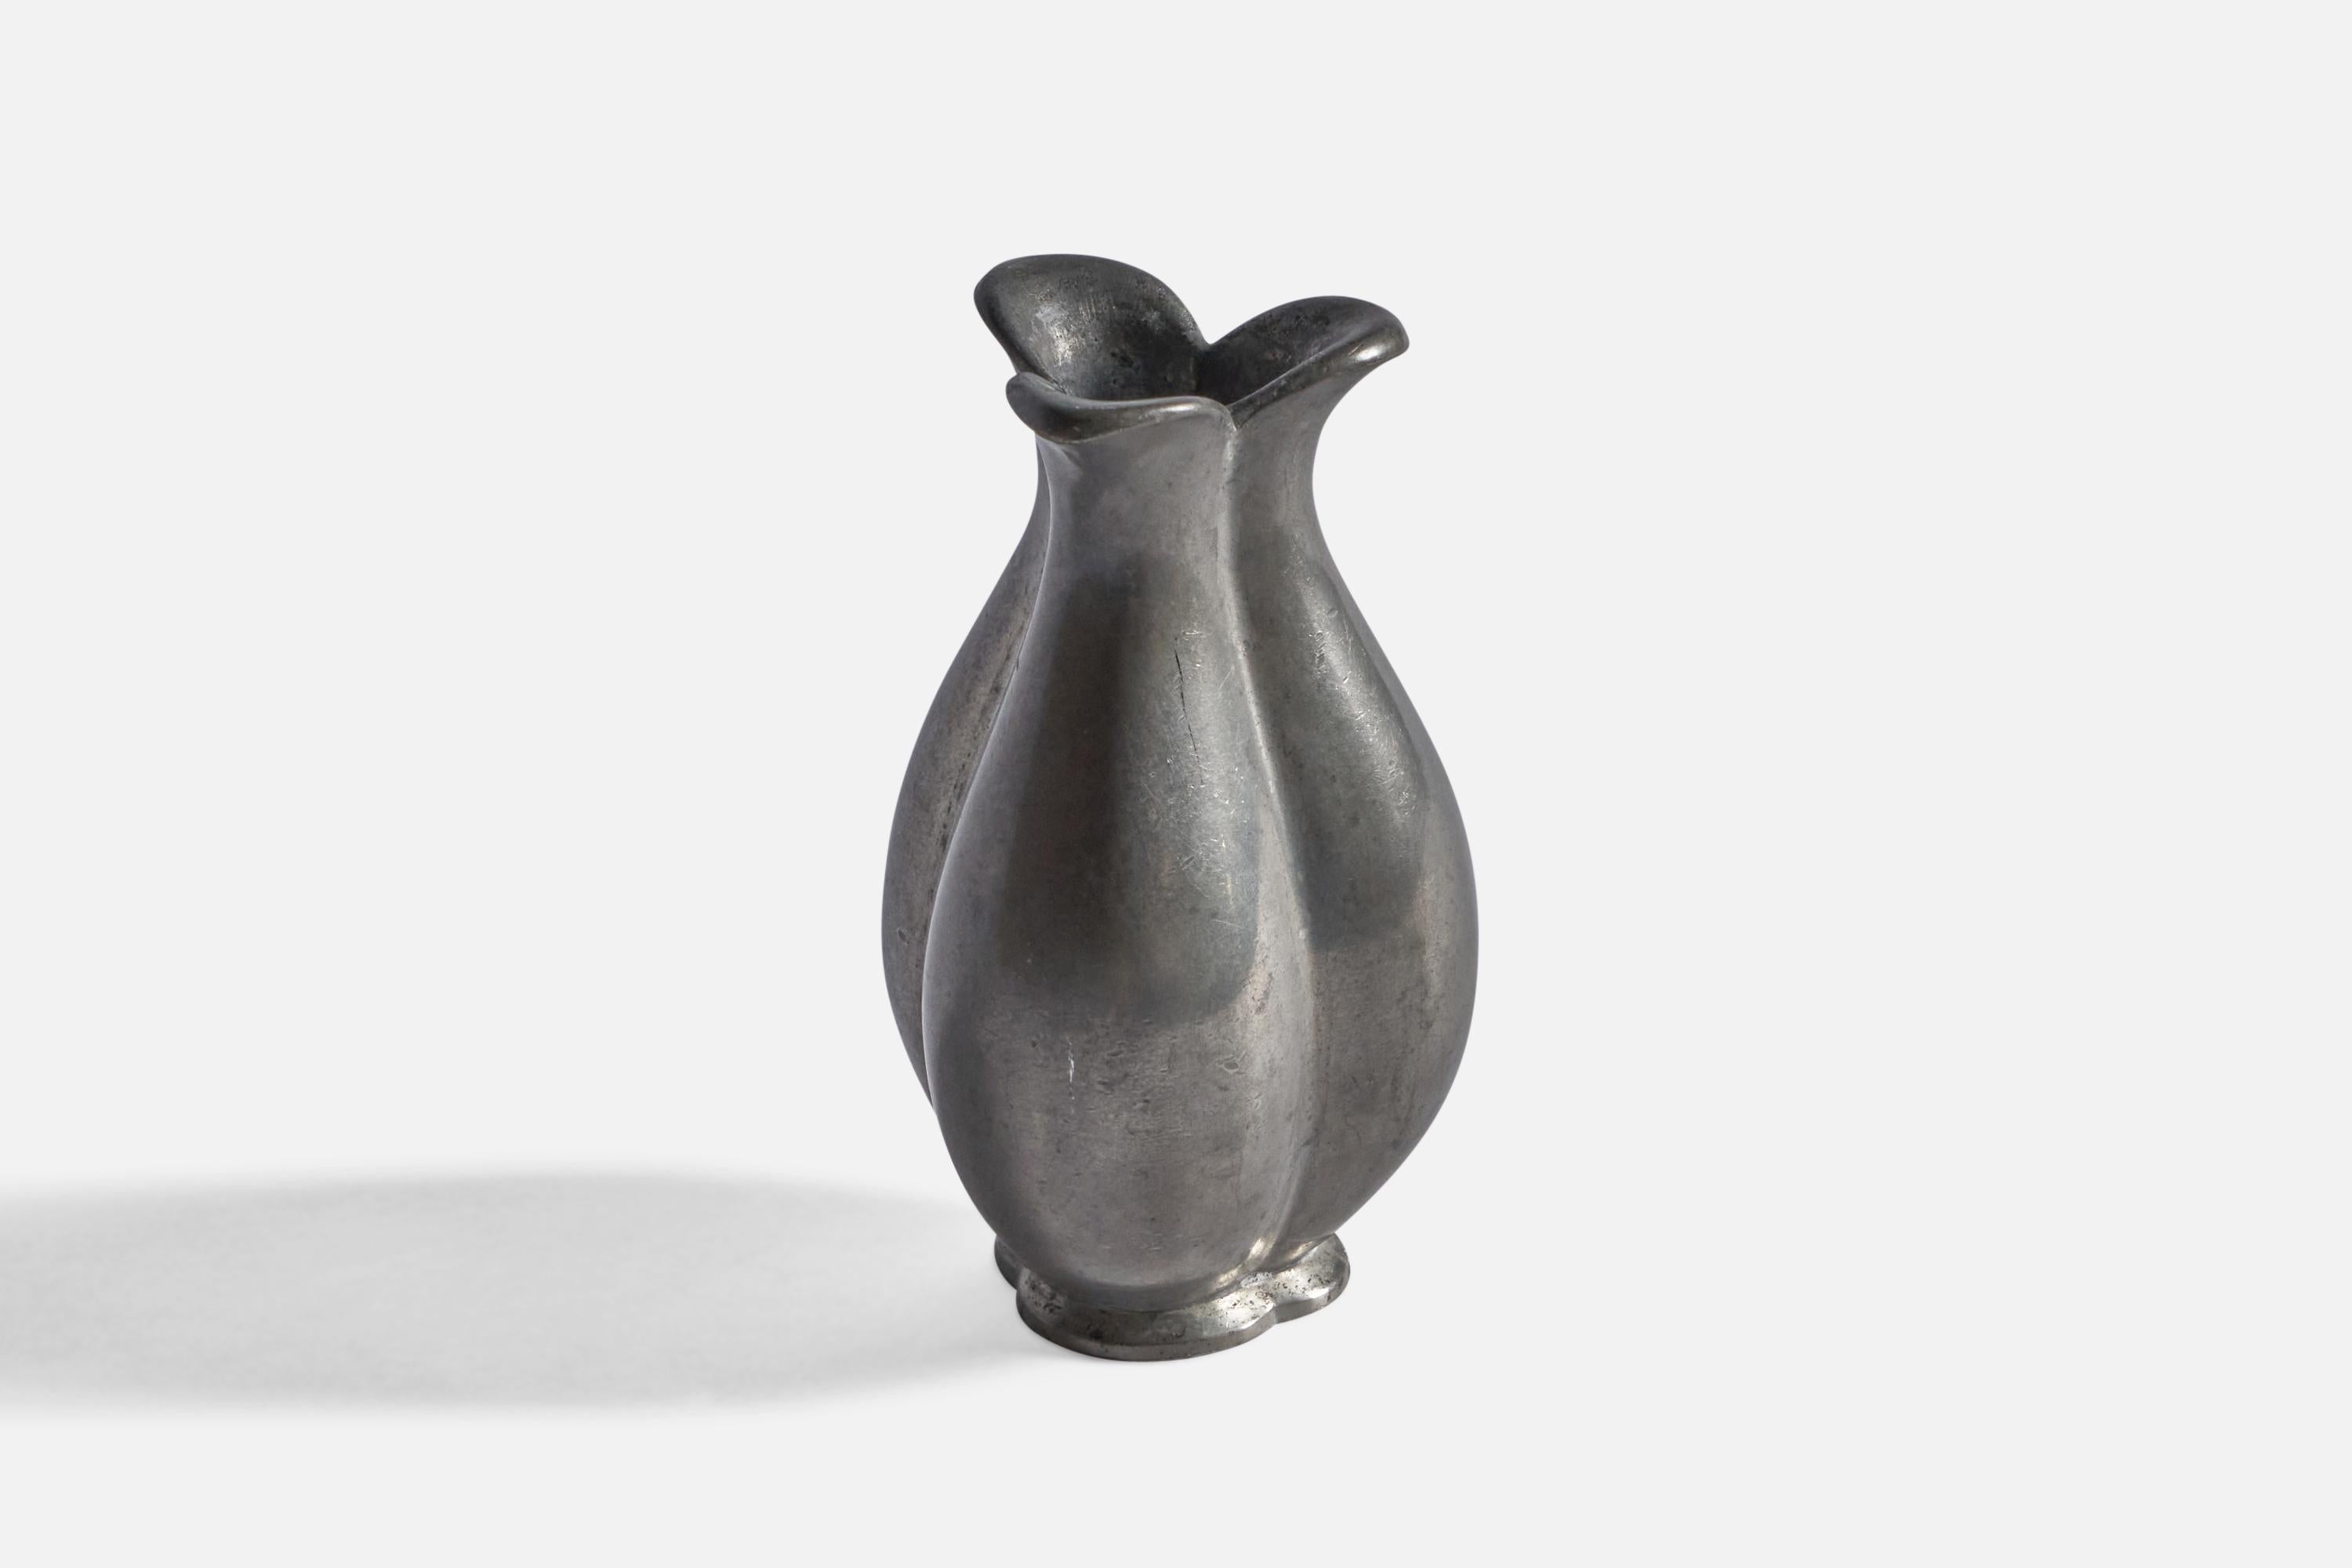 A cast pewter vase designed and produced by Just Andersen, Denmark, 1930s.